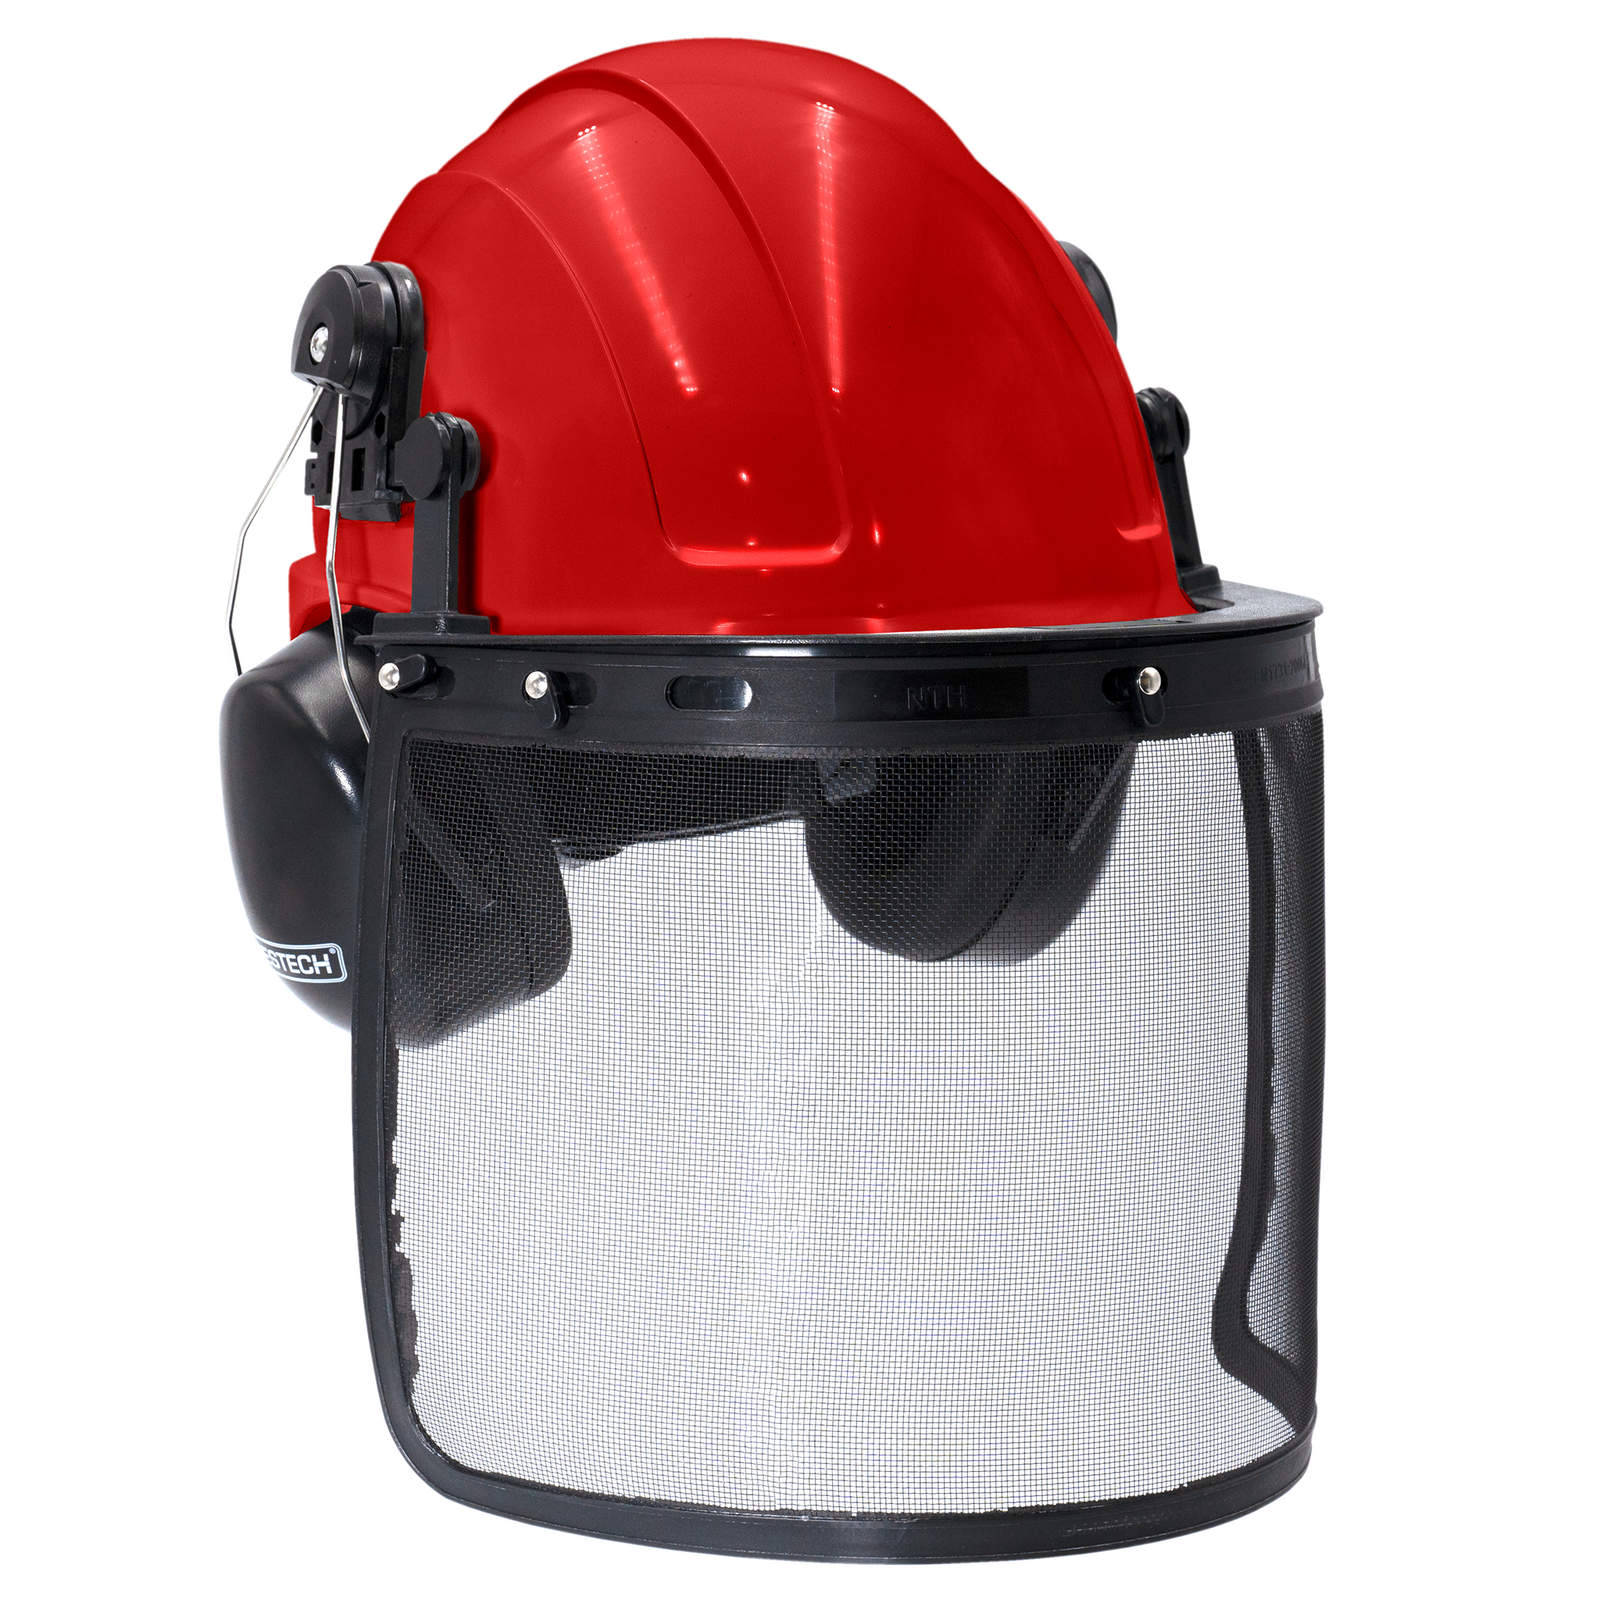 Red safety cap style helmet with iron mesh face shield and earmuffs for hearing protection